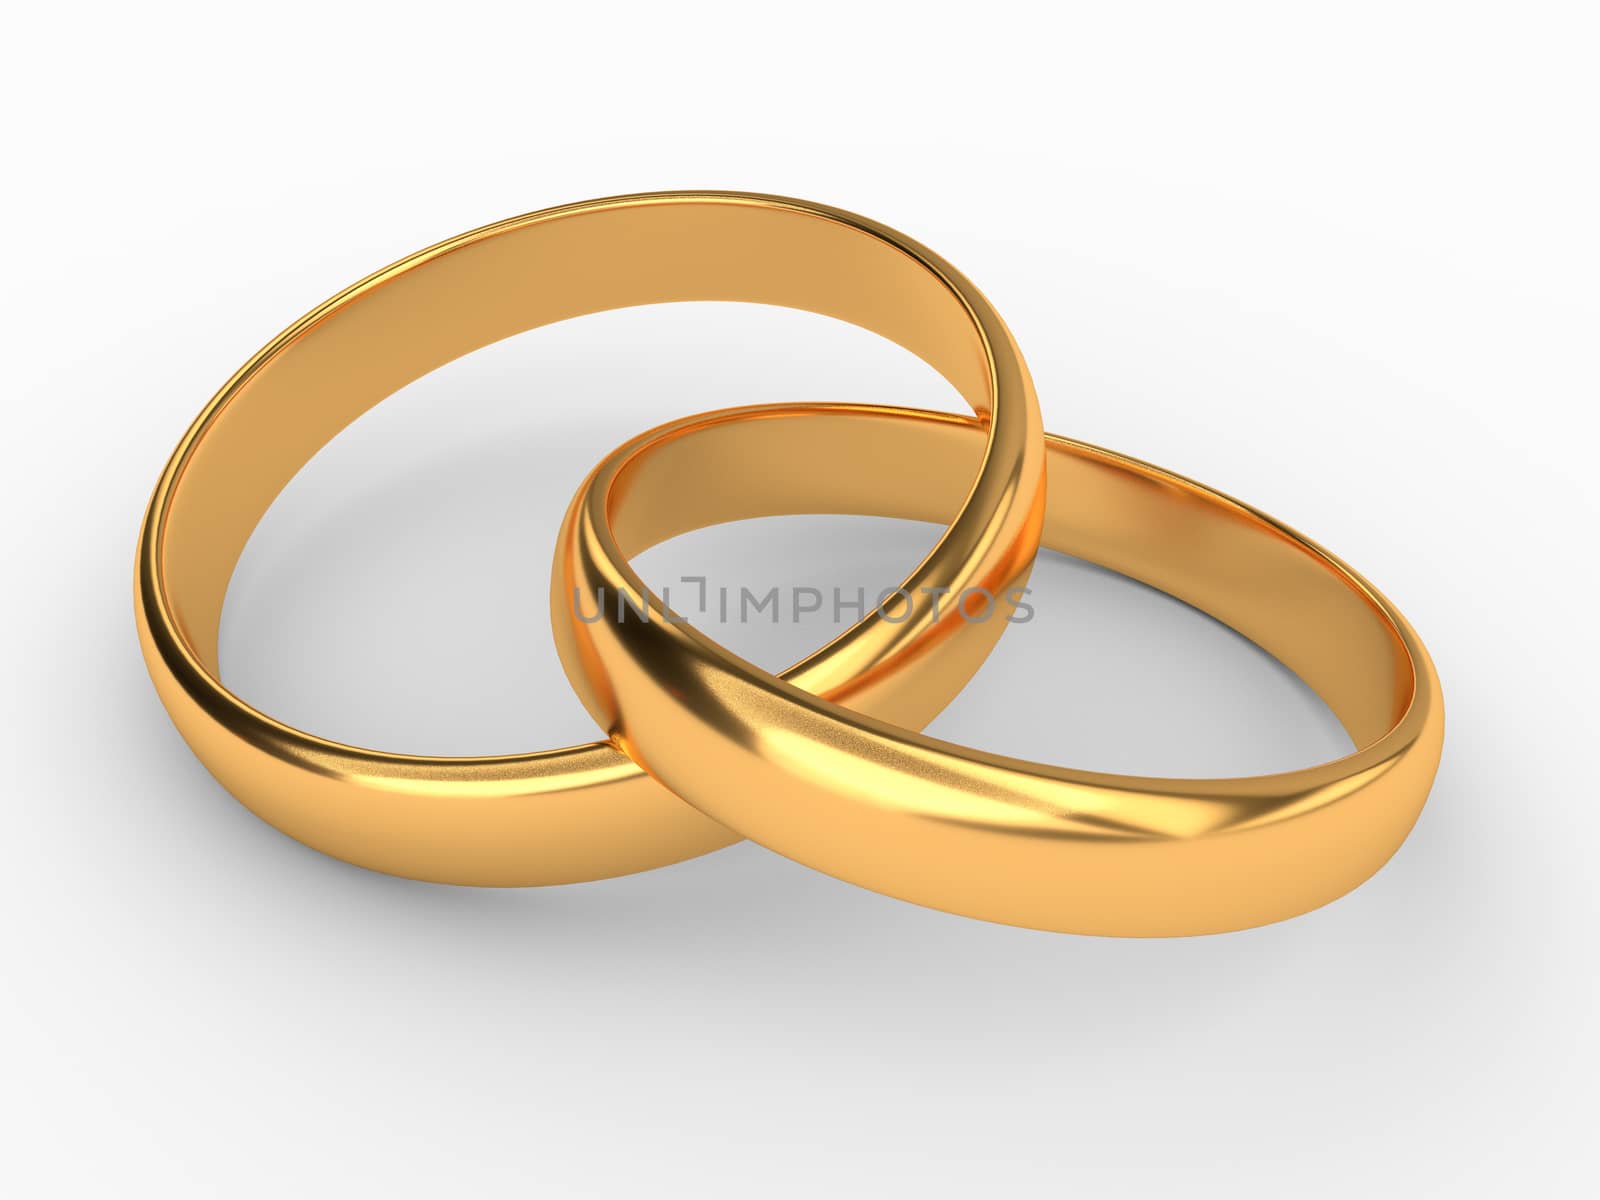 Illustration of two connected gold wedding rings